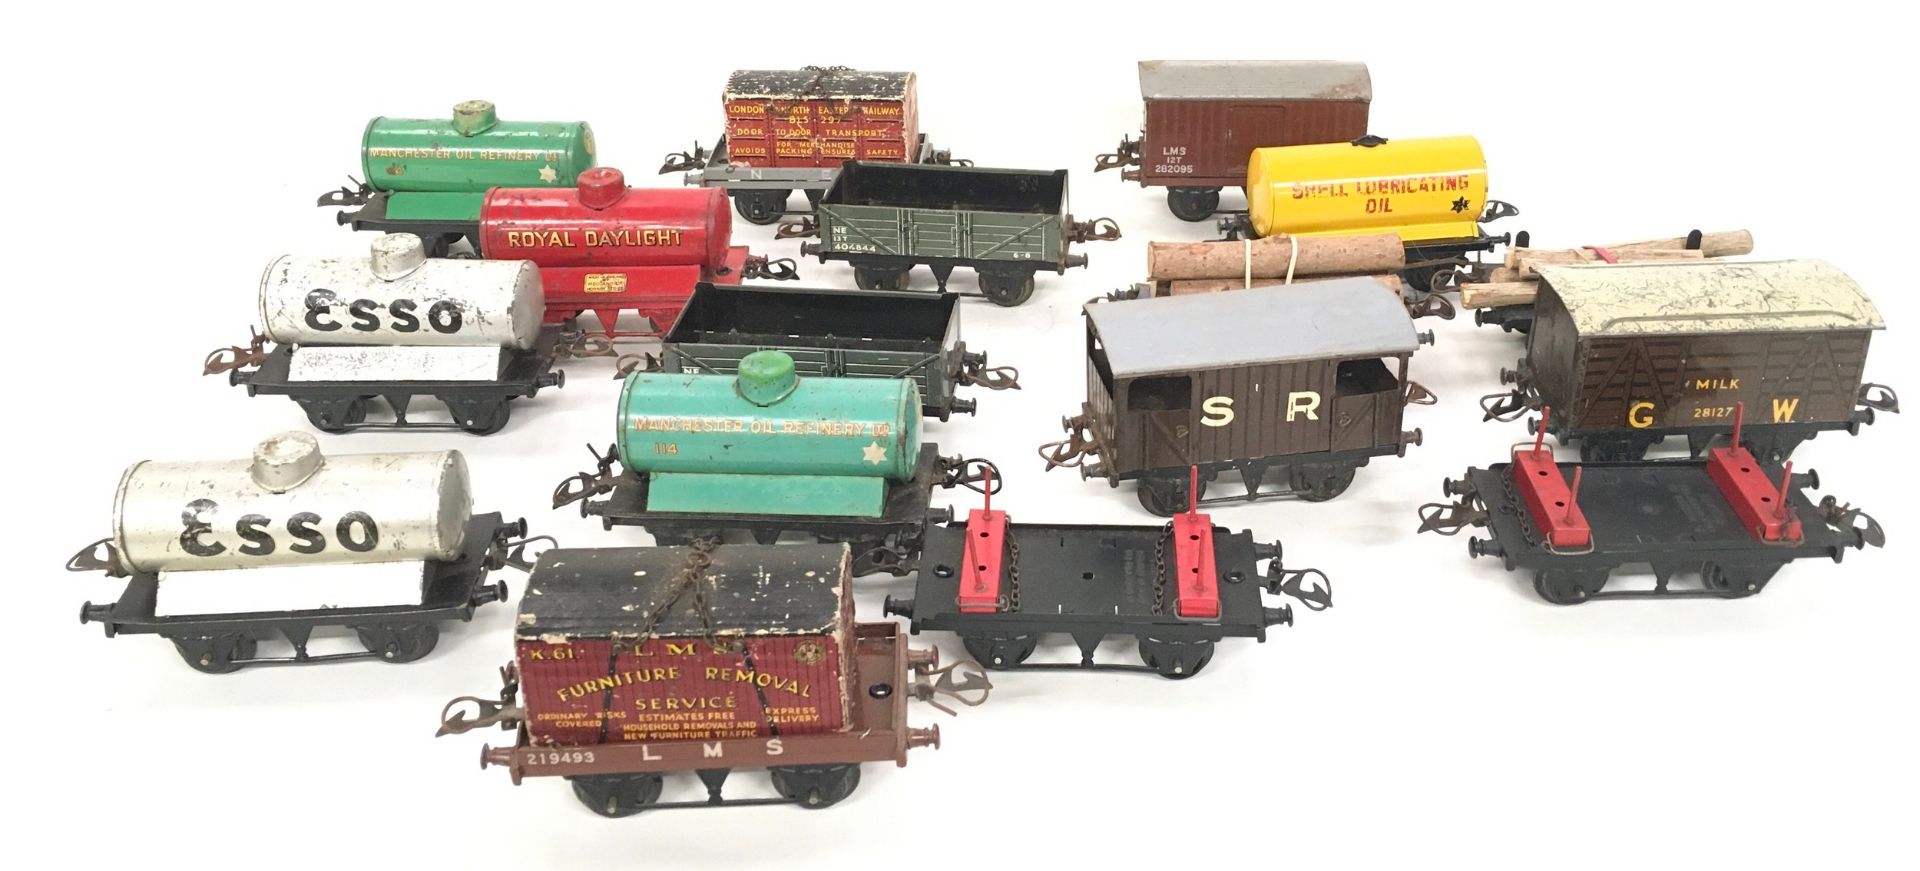 Hornby O gauge unboxed rolling stock to include 6 x Oil Tankers, 2 x Flat Wagon with Containers, 4 x - Image 3 of 3